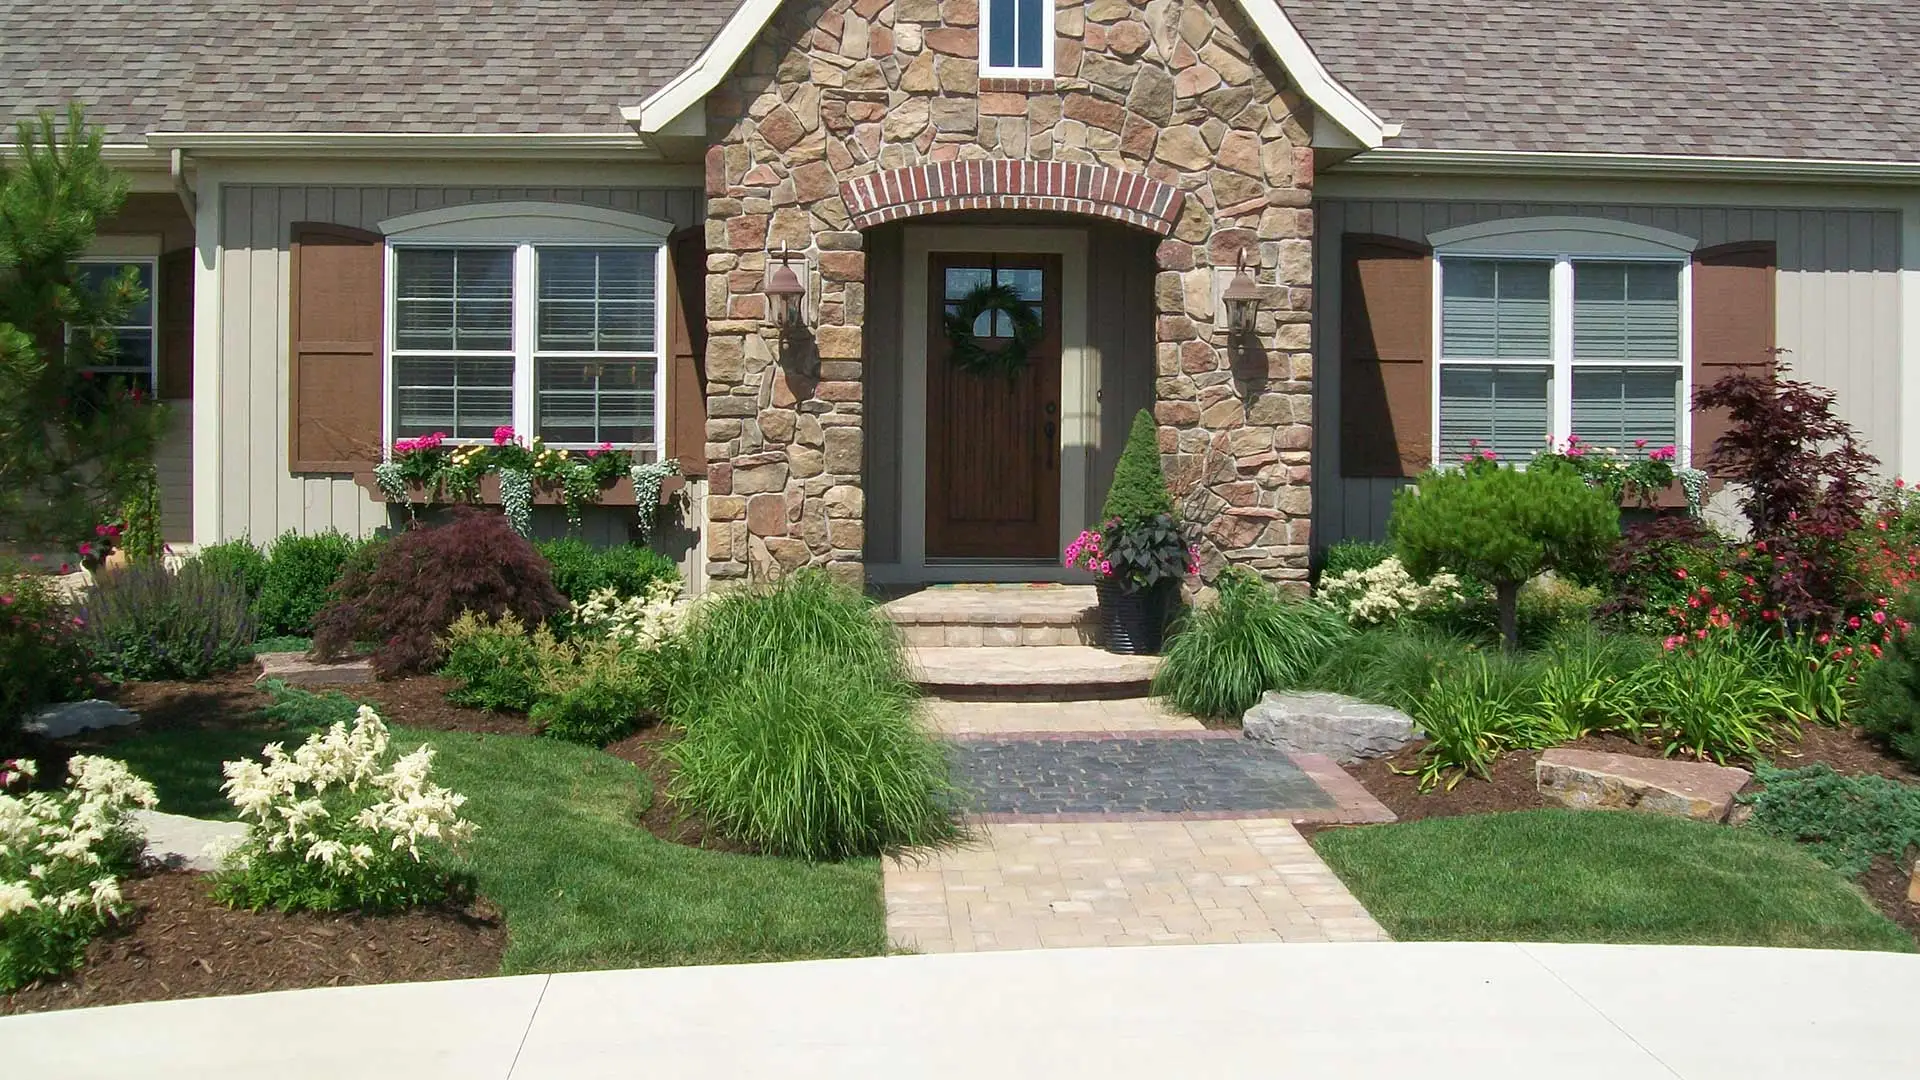 House front with landscaping plants in Allendale Charter Township, MI.